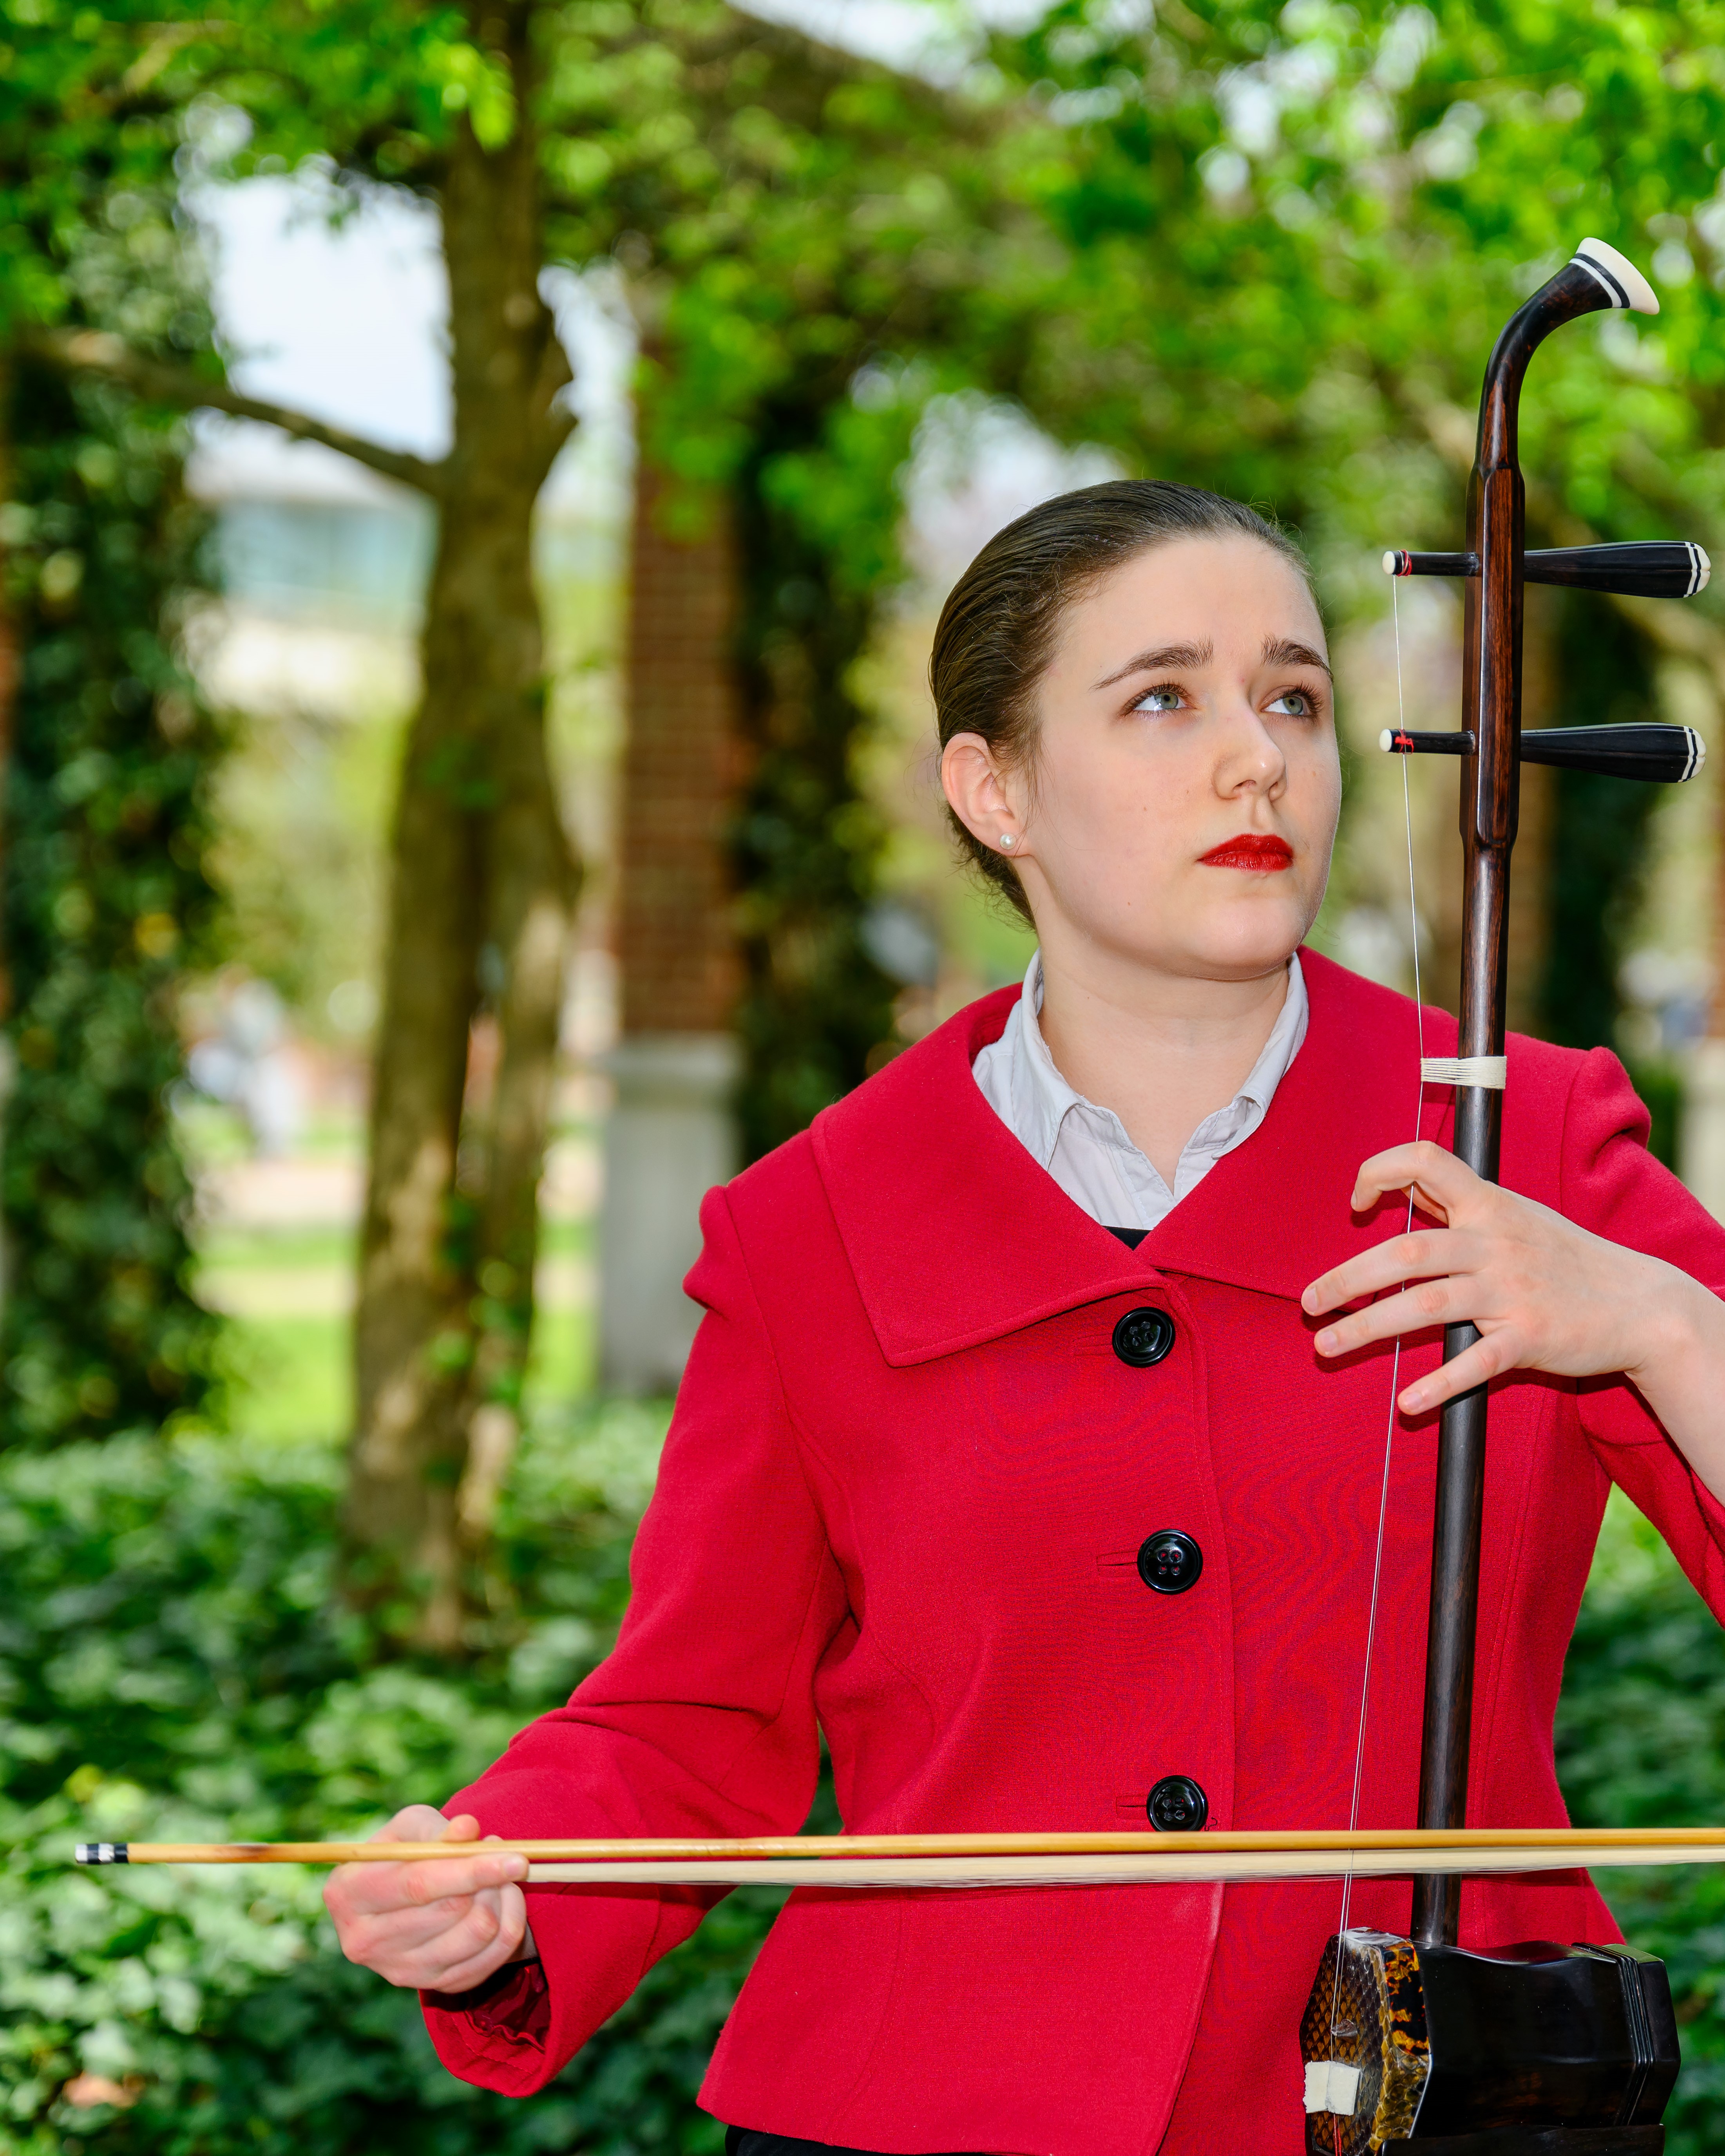 Gretta Maguire sits on a bench in a courtyard.  She is wearing a red blazer and playing erhu while looking up and off to the left.